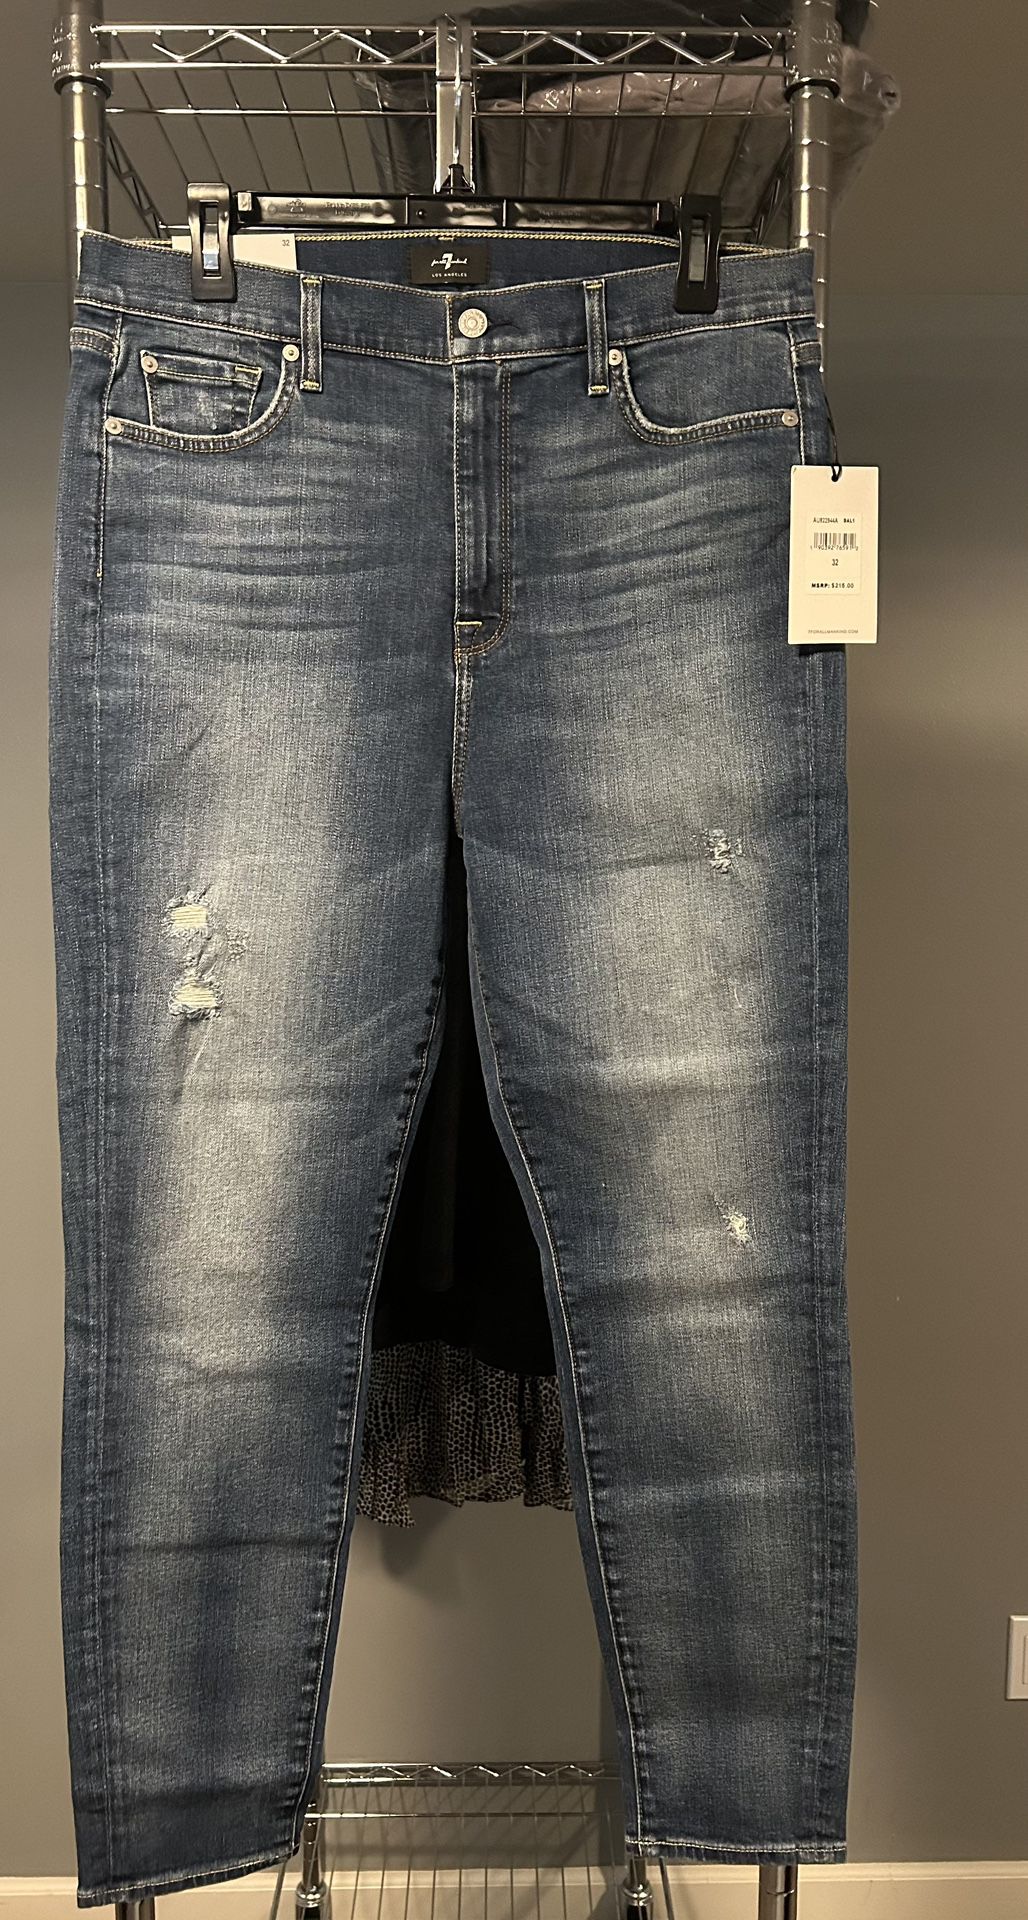 NWT 7 For All Mankind High Waist Ankle Skinny Size 32